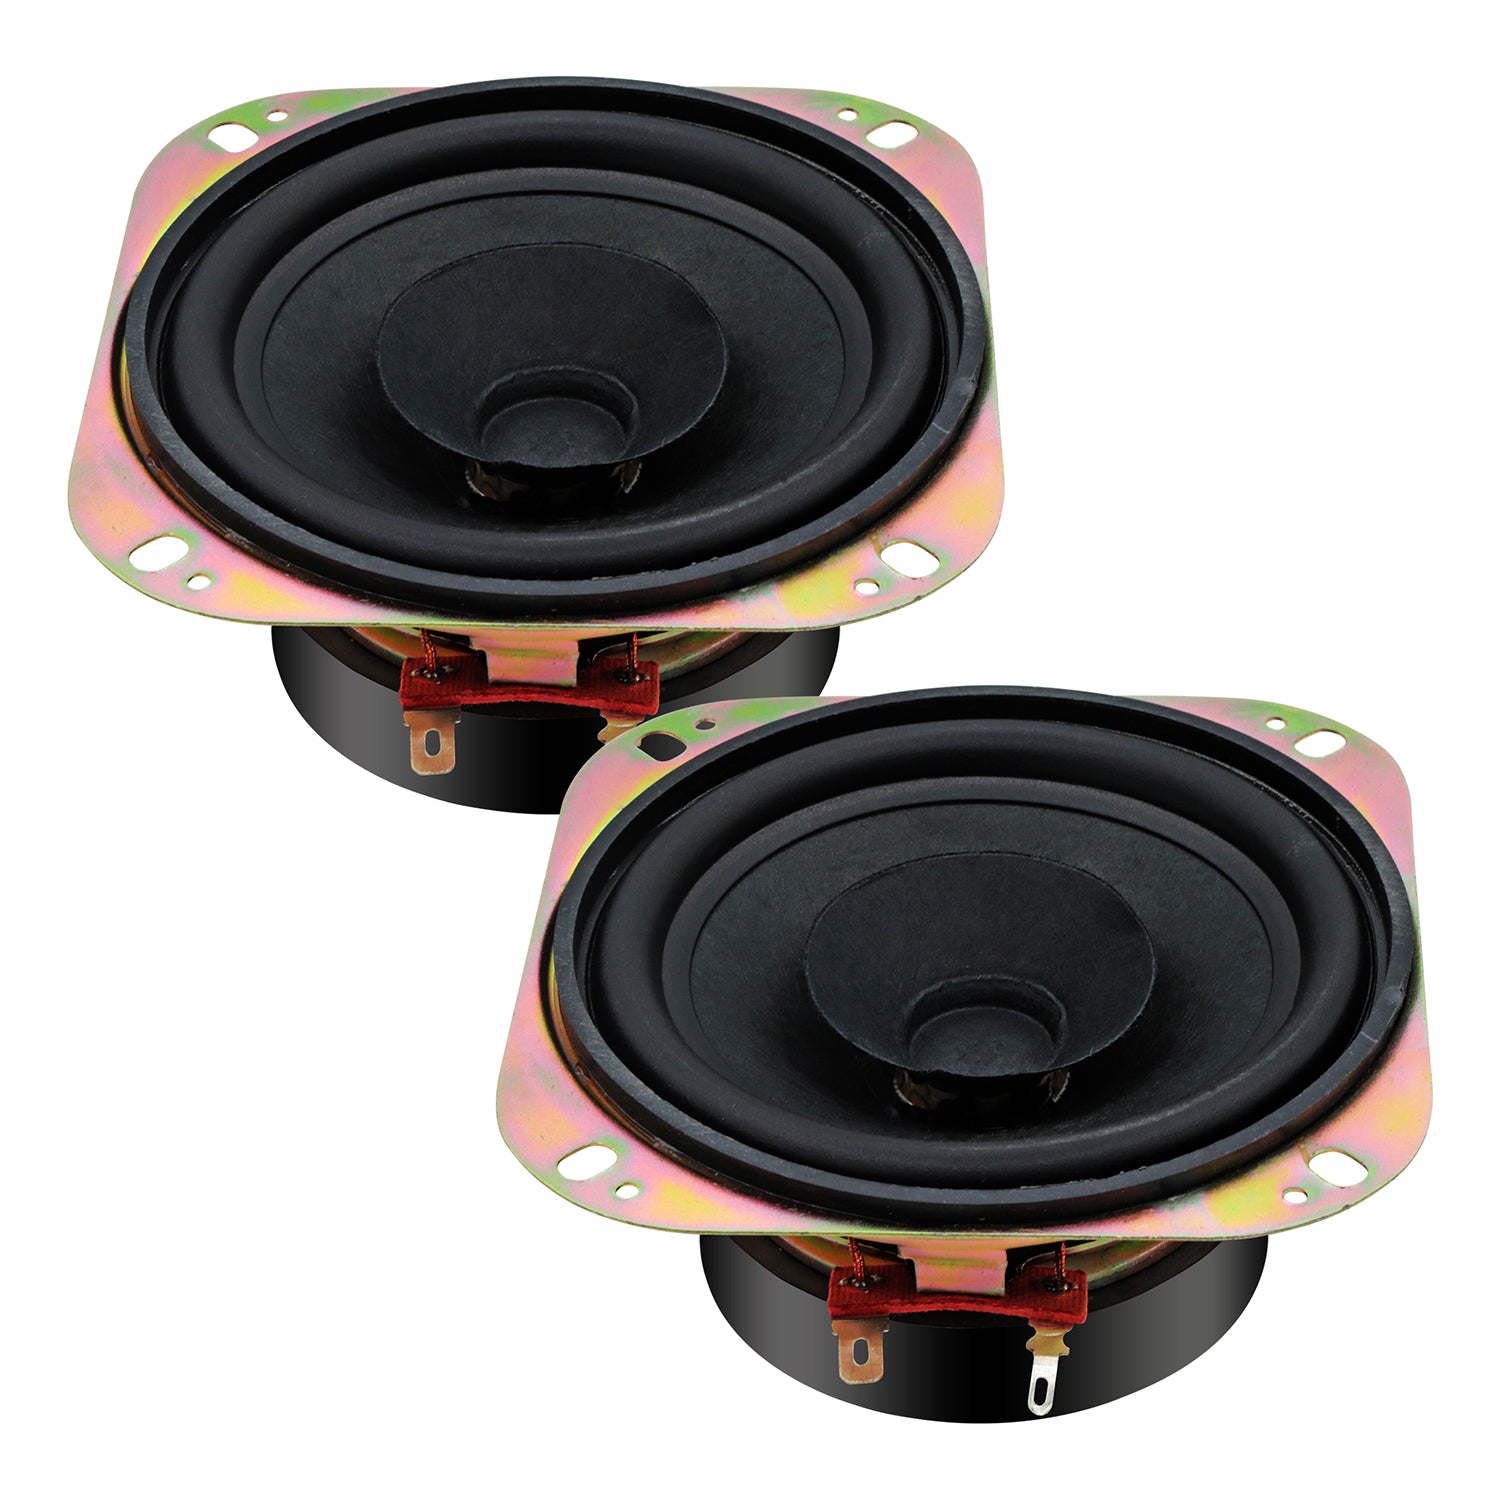 5 Core 4 Inch Subwoofer 200W Peak 4 Ohm Replacement Car Bass Sub Woofer w 0.81" Voice Coil 2/4 Pack